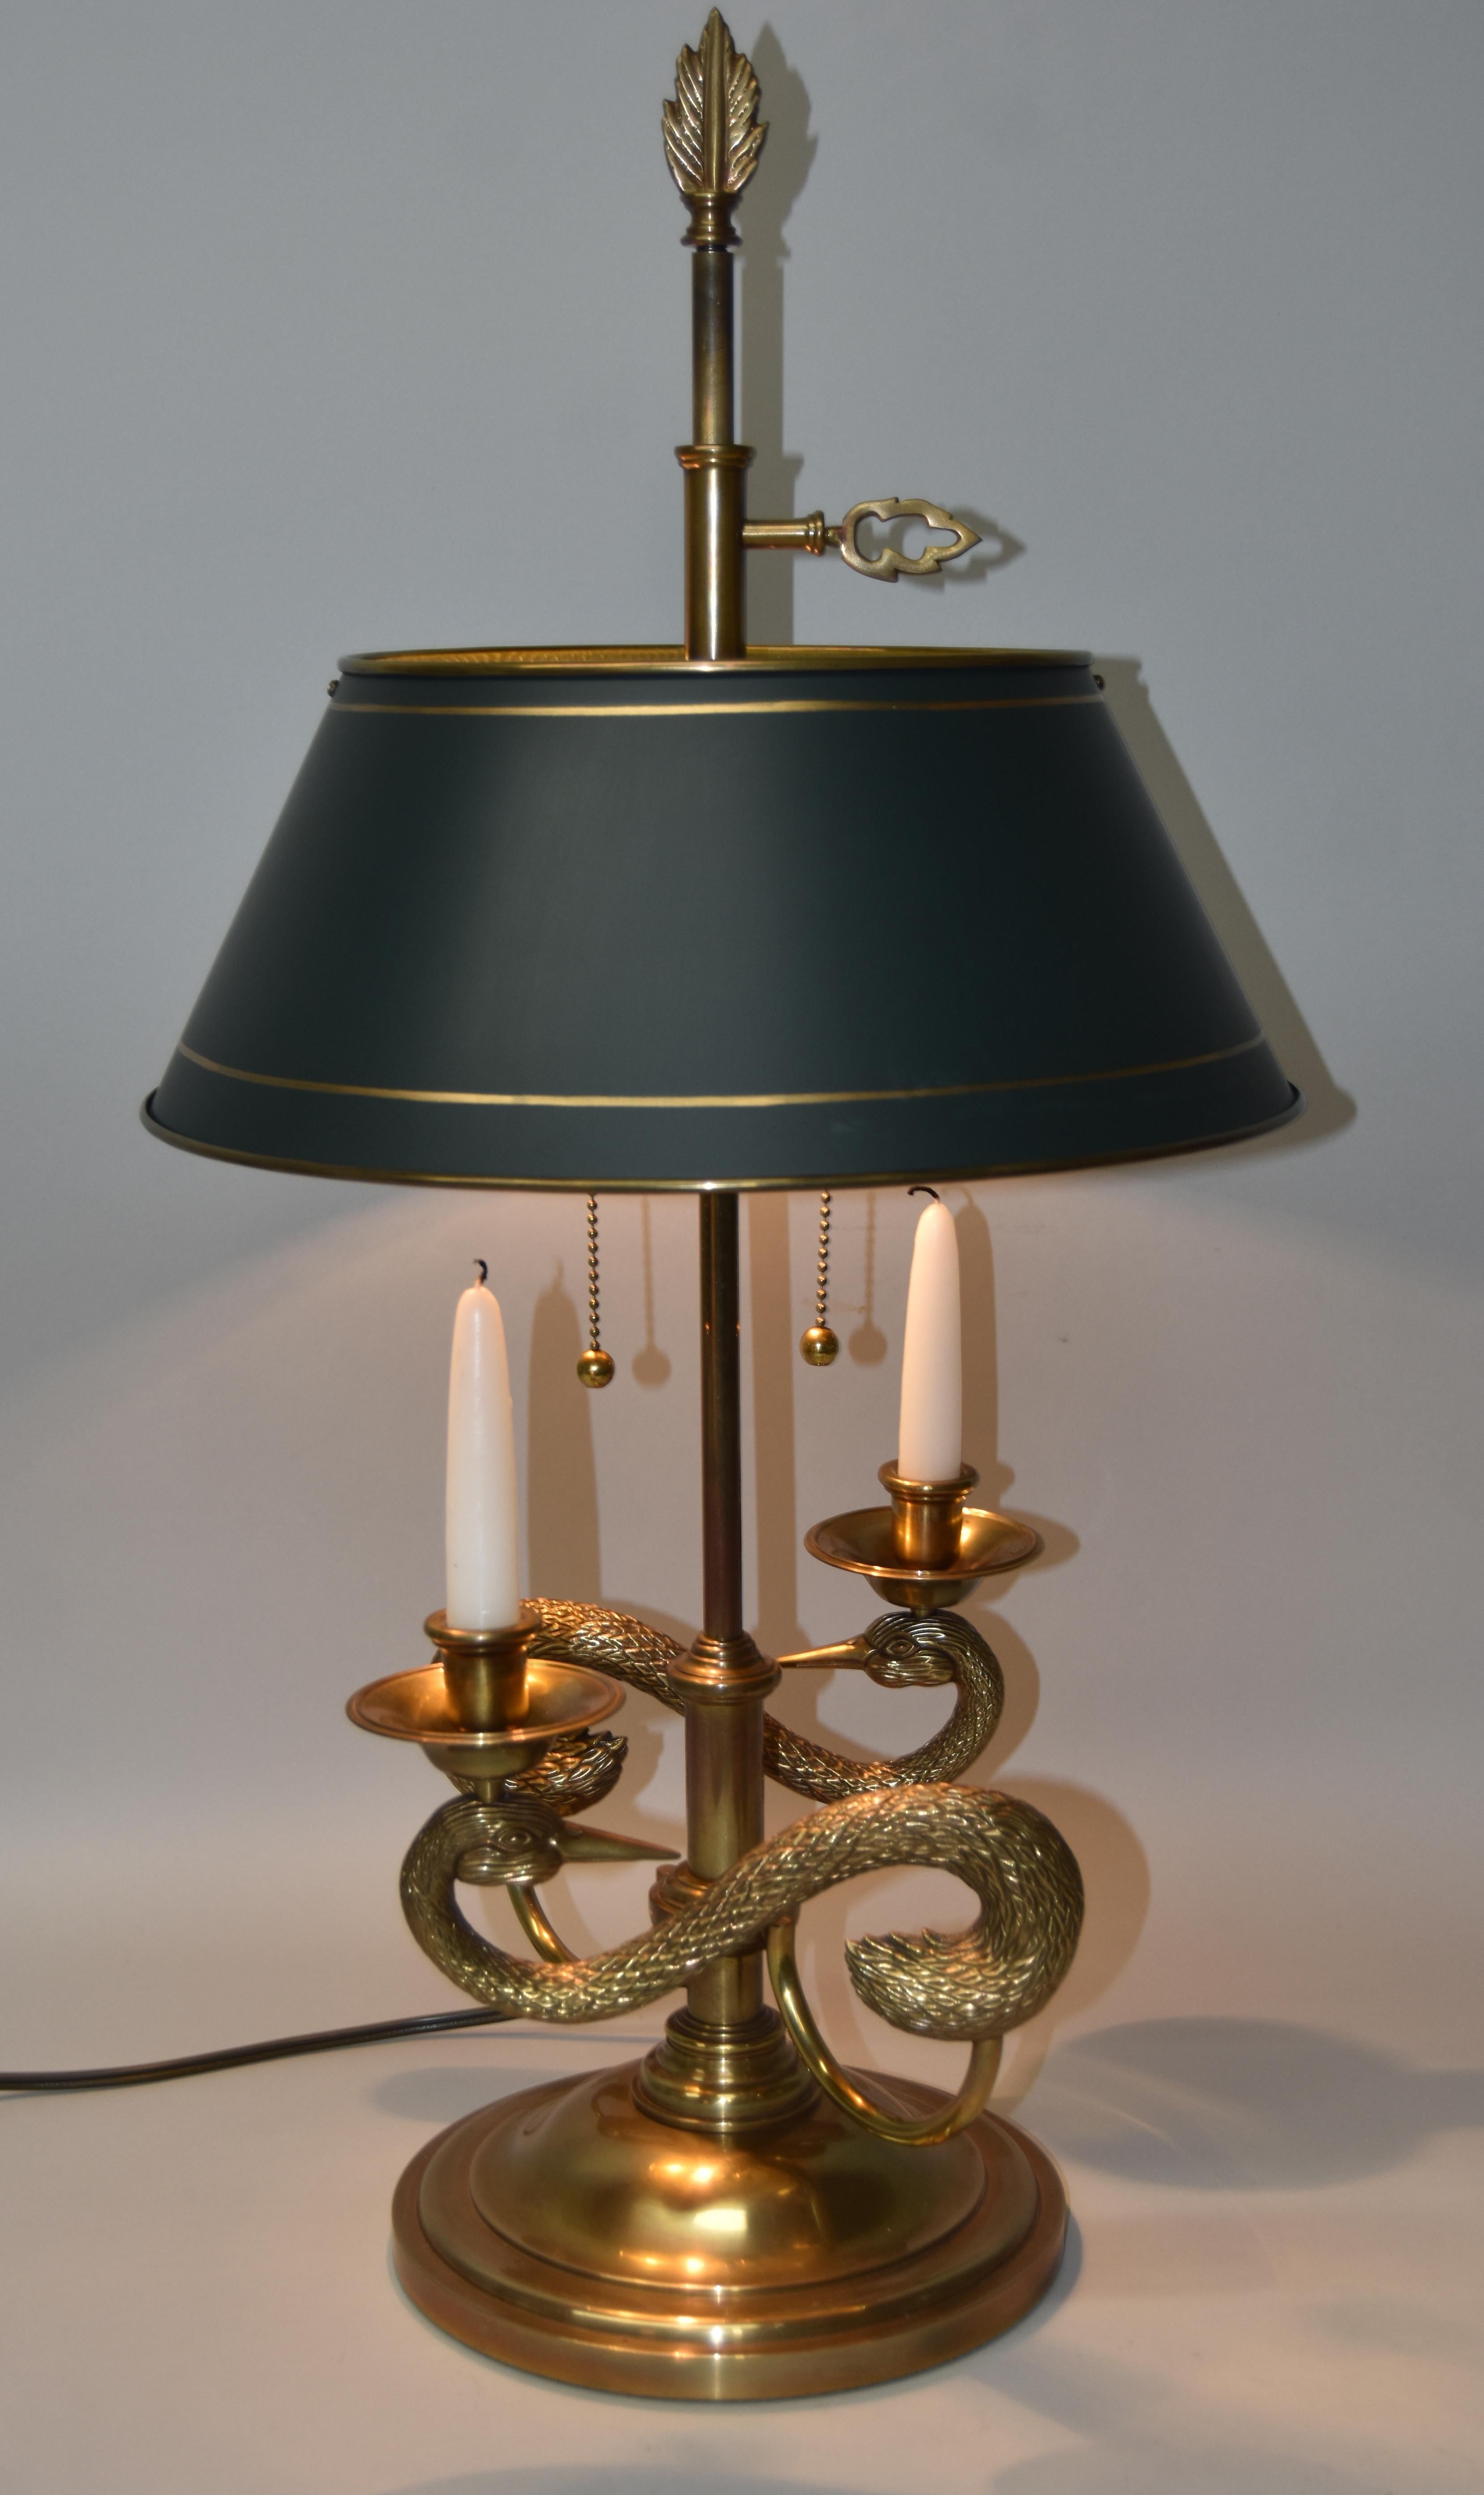 Chapman solid brass double arm table lamp with swan motif and a pair of candleholders. Hand painted gold banding on dark green brass tole shade. Shade can be adjusted. Two sockets have ball pulls. Comes with a light diffuser.